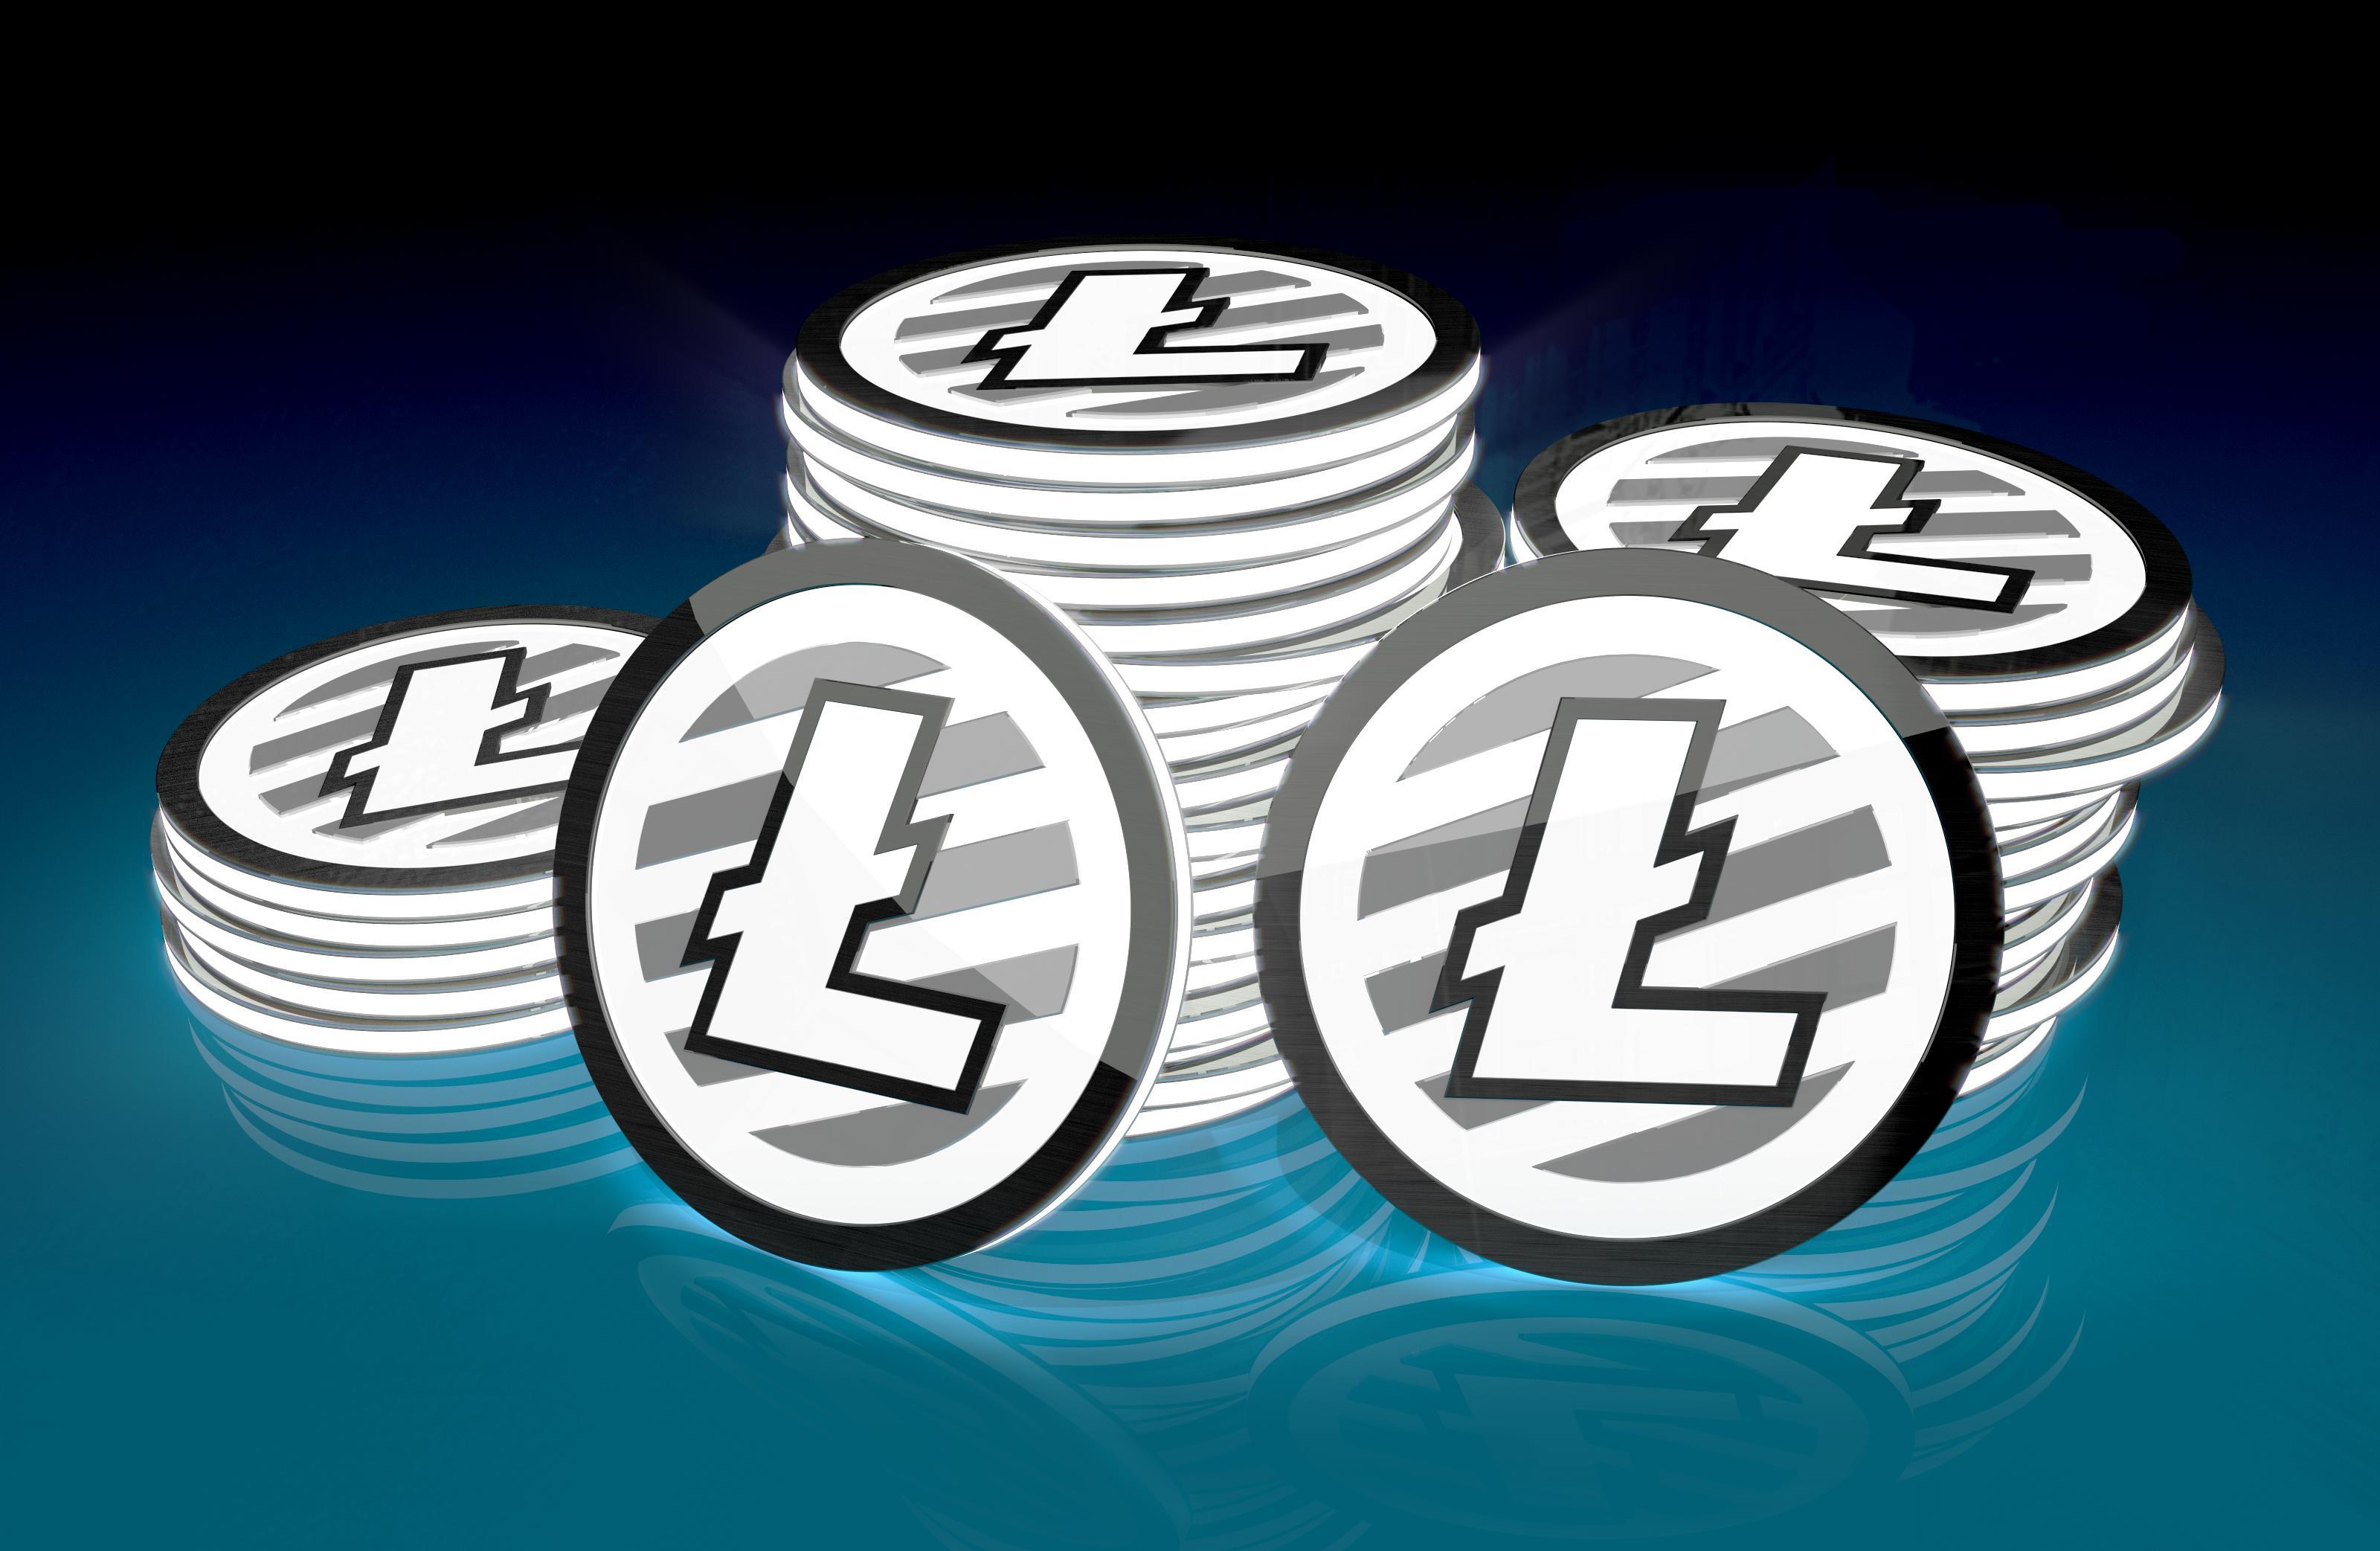 Litecoin Wallpapers Top Free Litecoin Backgrounds Wallpaperaccess Images, Photos, Reviews